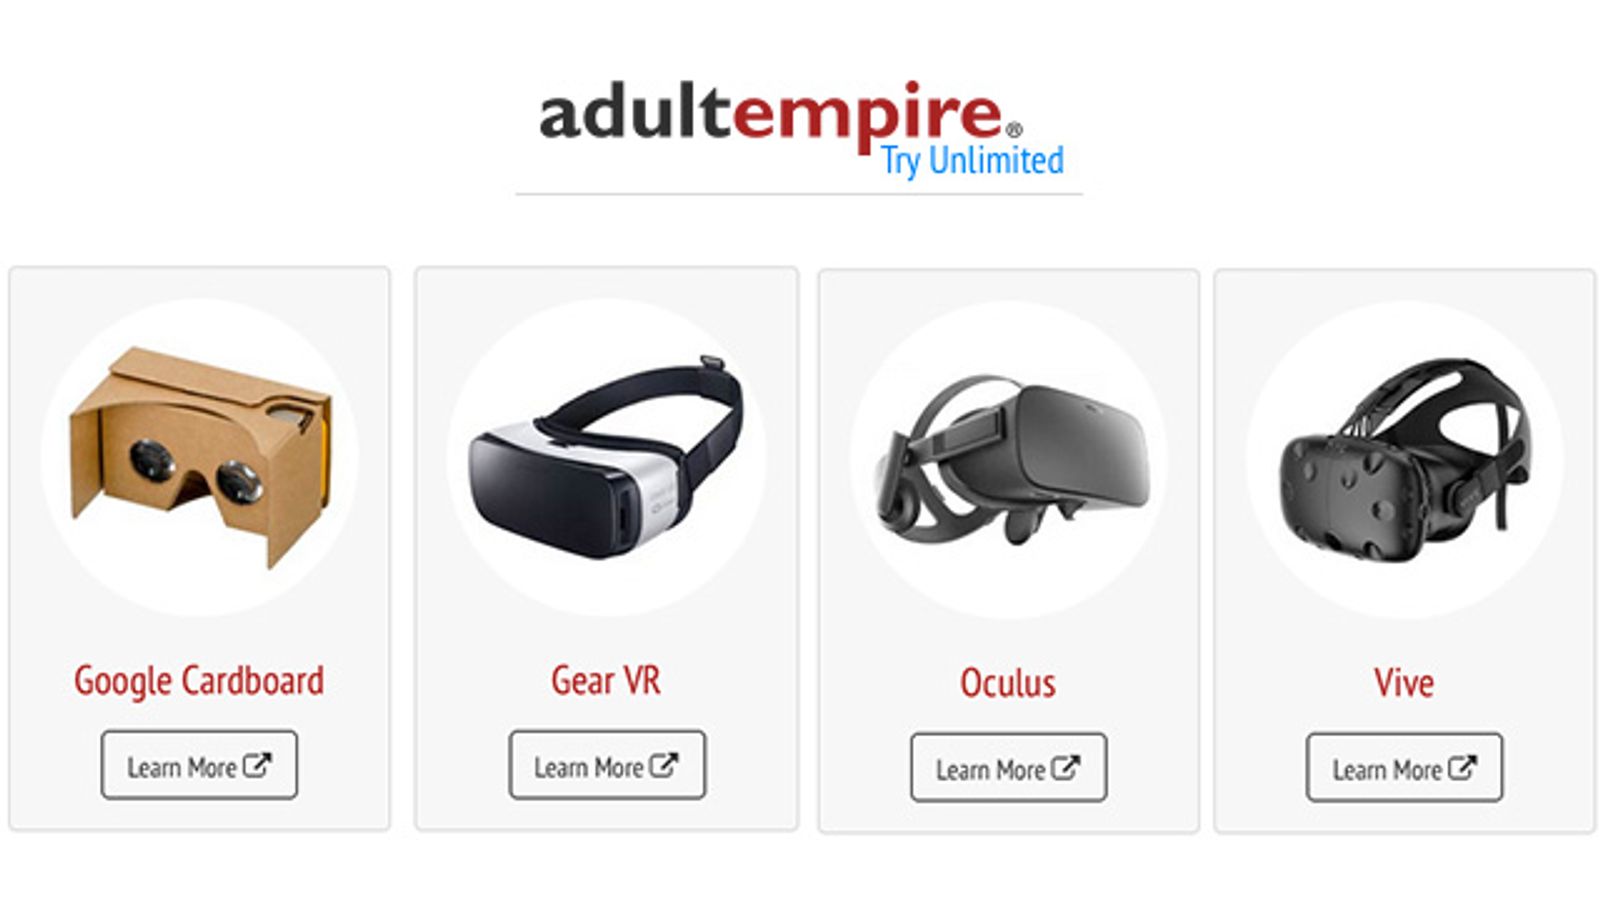 Adult Empire Adds Virtual Reality Porn To Its List of Offerings